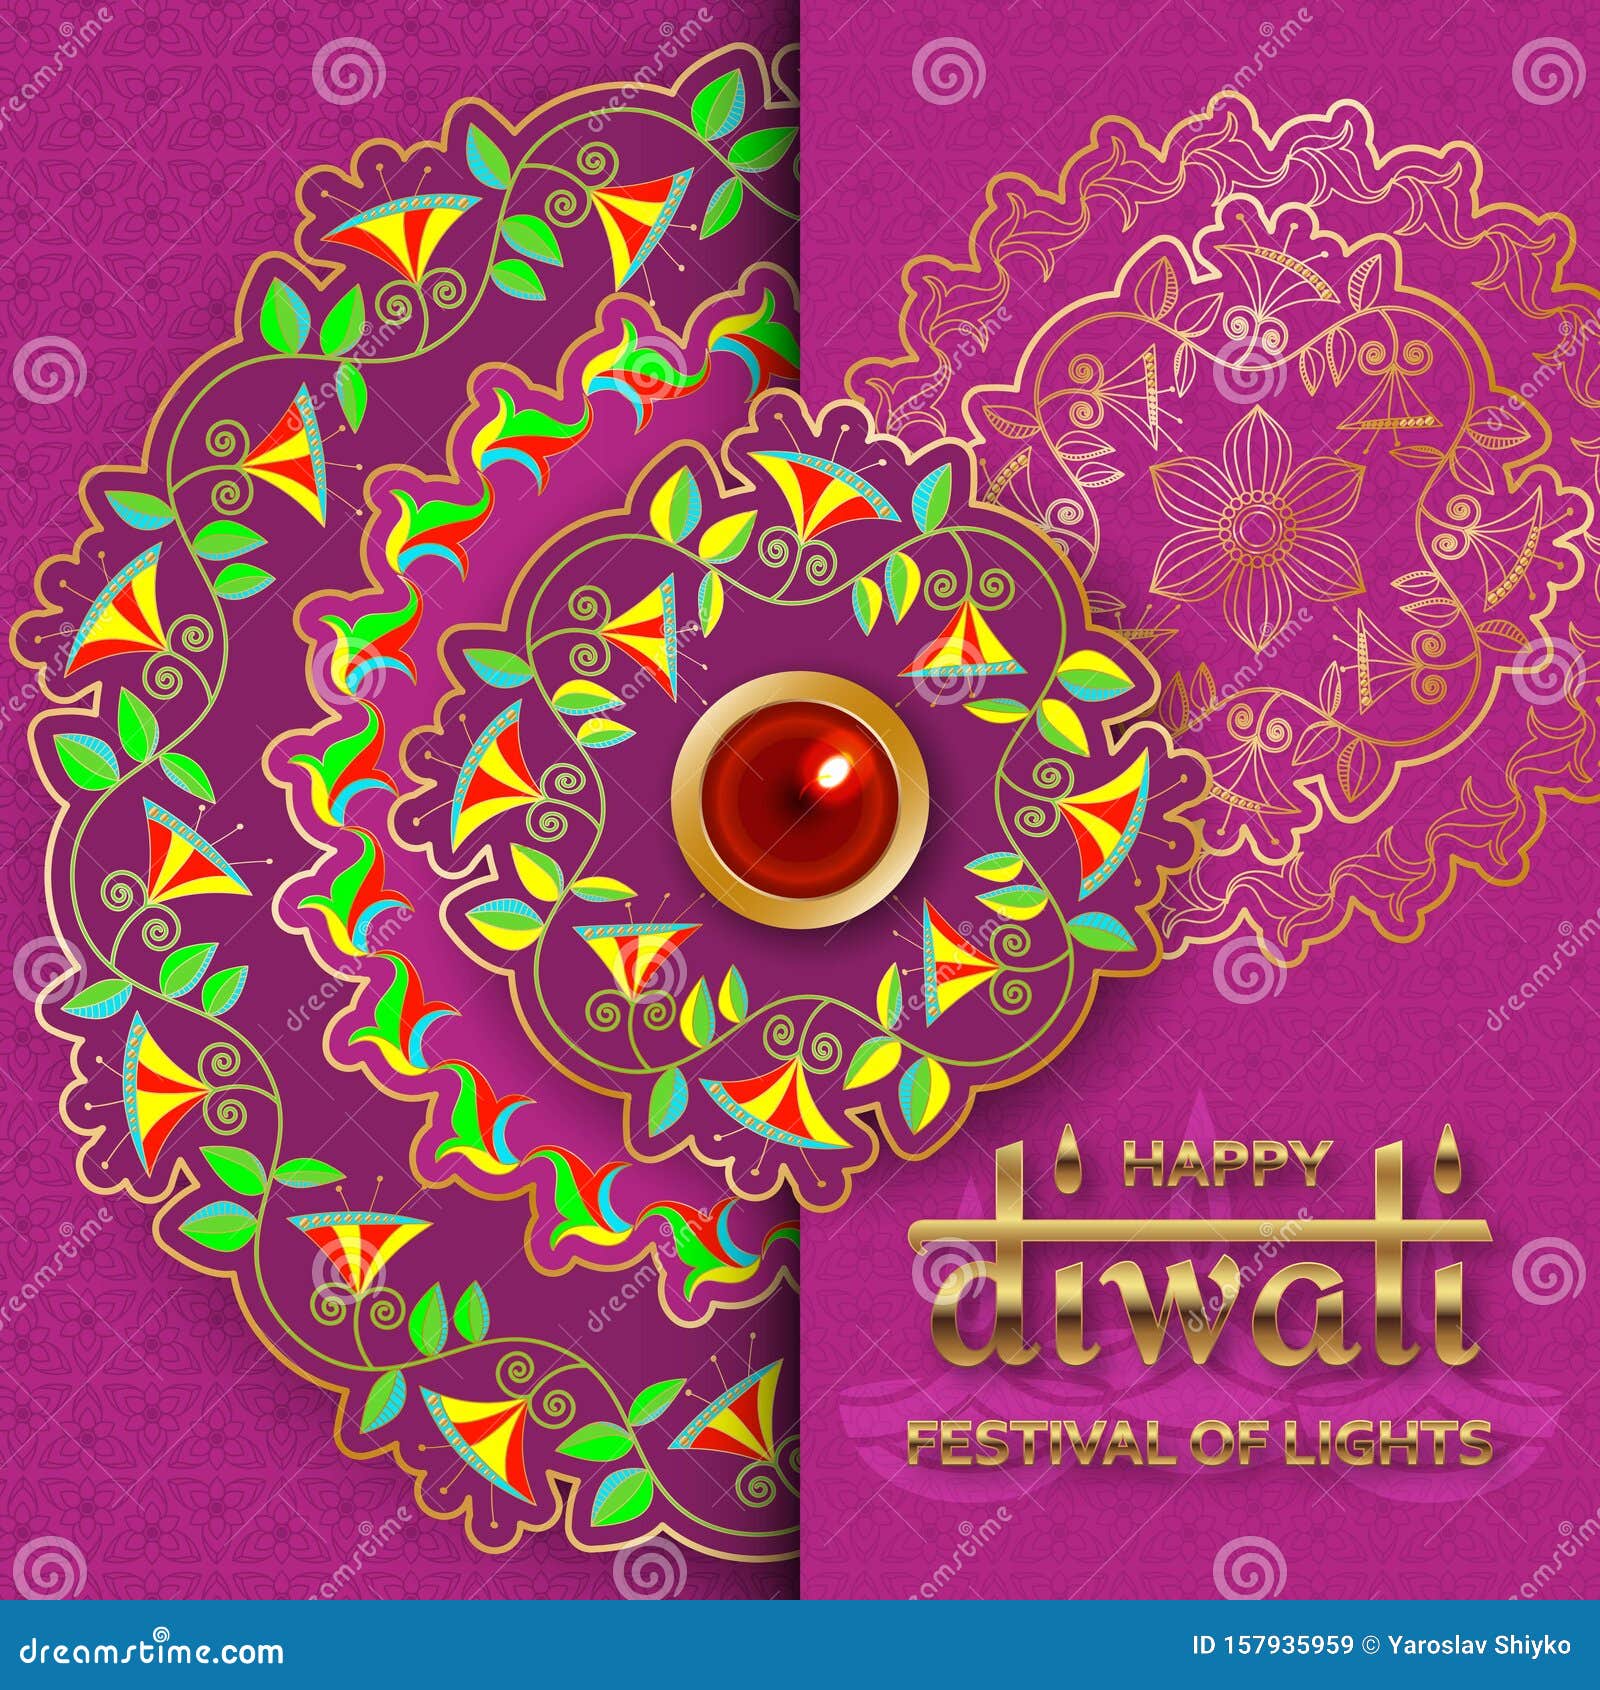 Happy Diwali Purple Template with Floral Paisley and Mandala. Flower and  Leaves Patterns. Festival of Lights Stock Vector - Illustration of ganpati,  mandala: 157935959